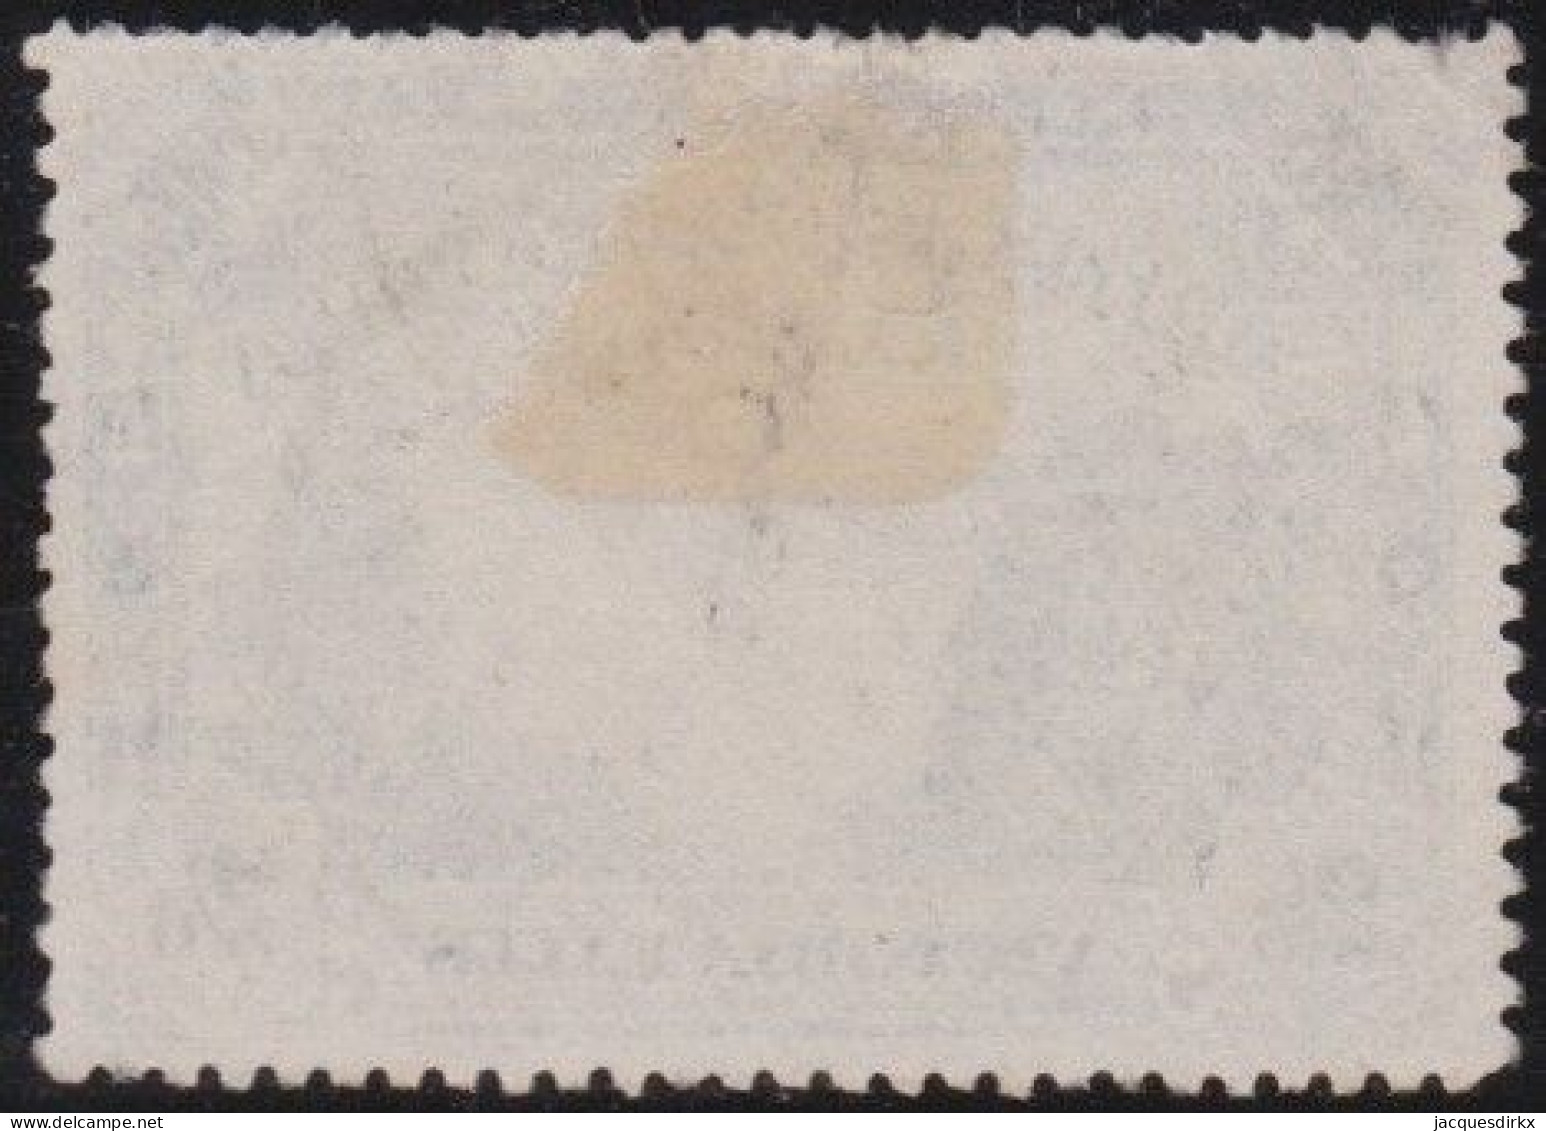 British South Africa Company      .    SG  .   98  (2 Scans)       .  O   .   Cancelled - Usati